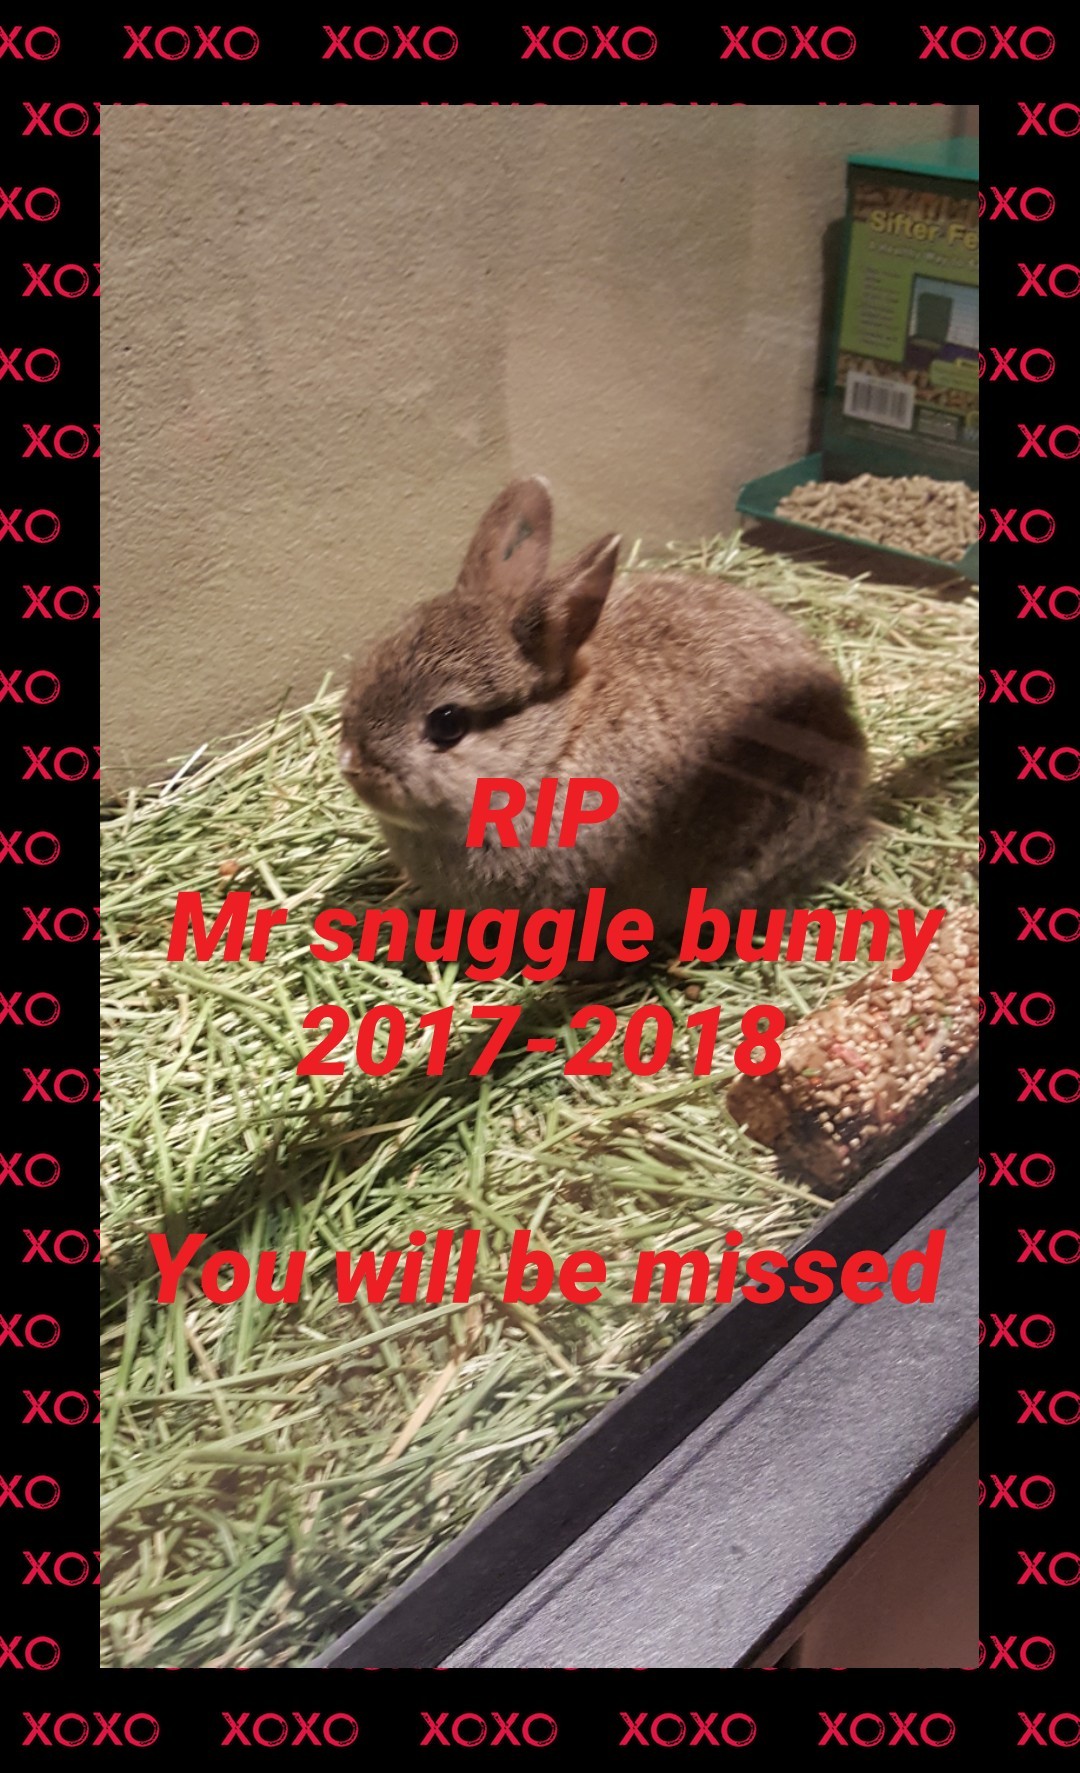 RIP
 Mr snuggle bunny
2017-2018

You will be missed